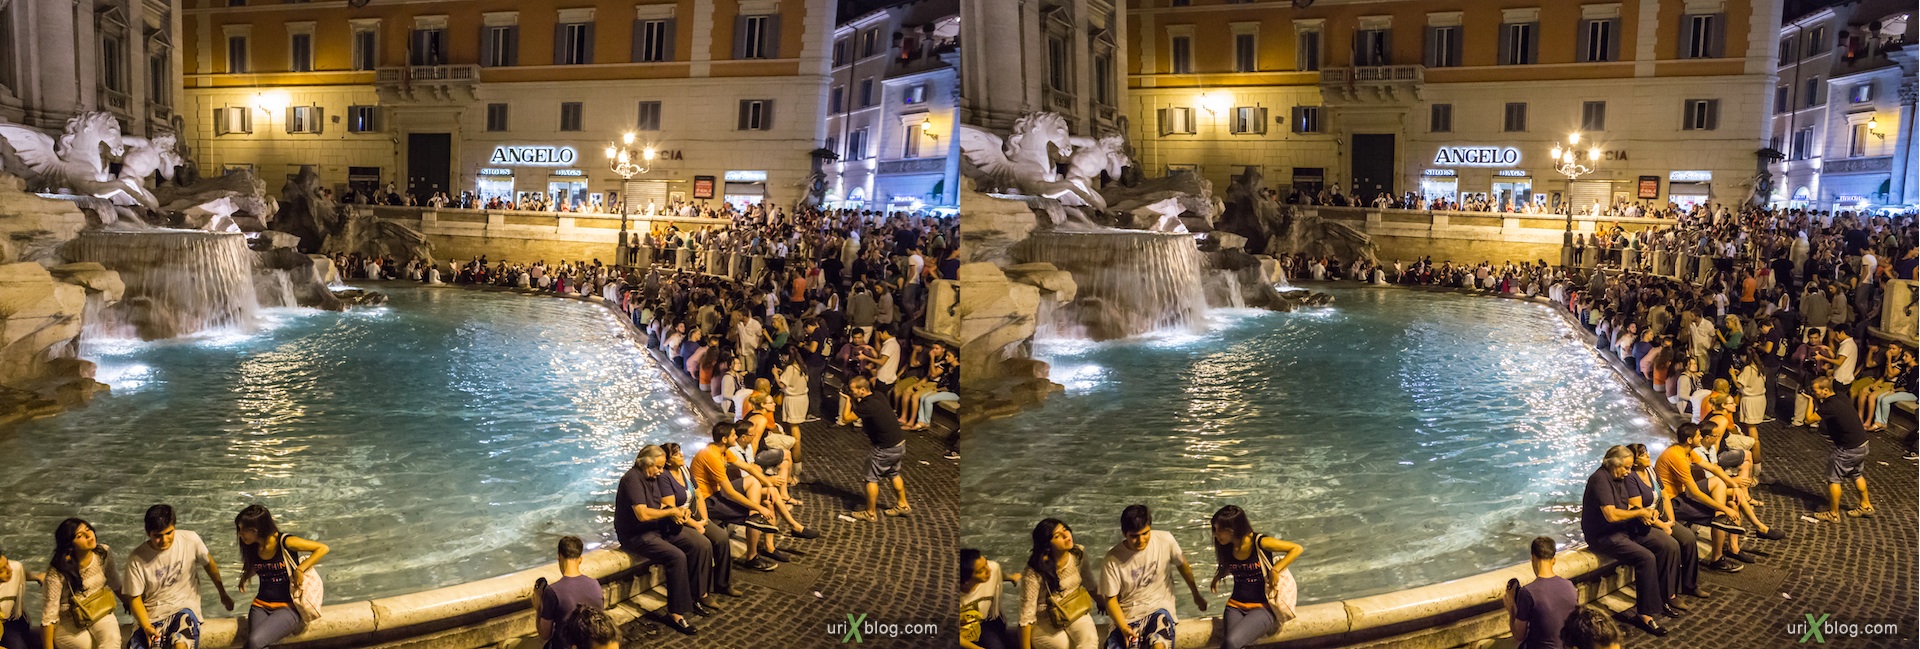 2012, Trevi fountain, Rome, Italy, 3D, stereo pair, cross-eyed, crossview, cross view stereo pair